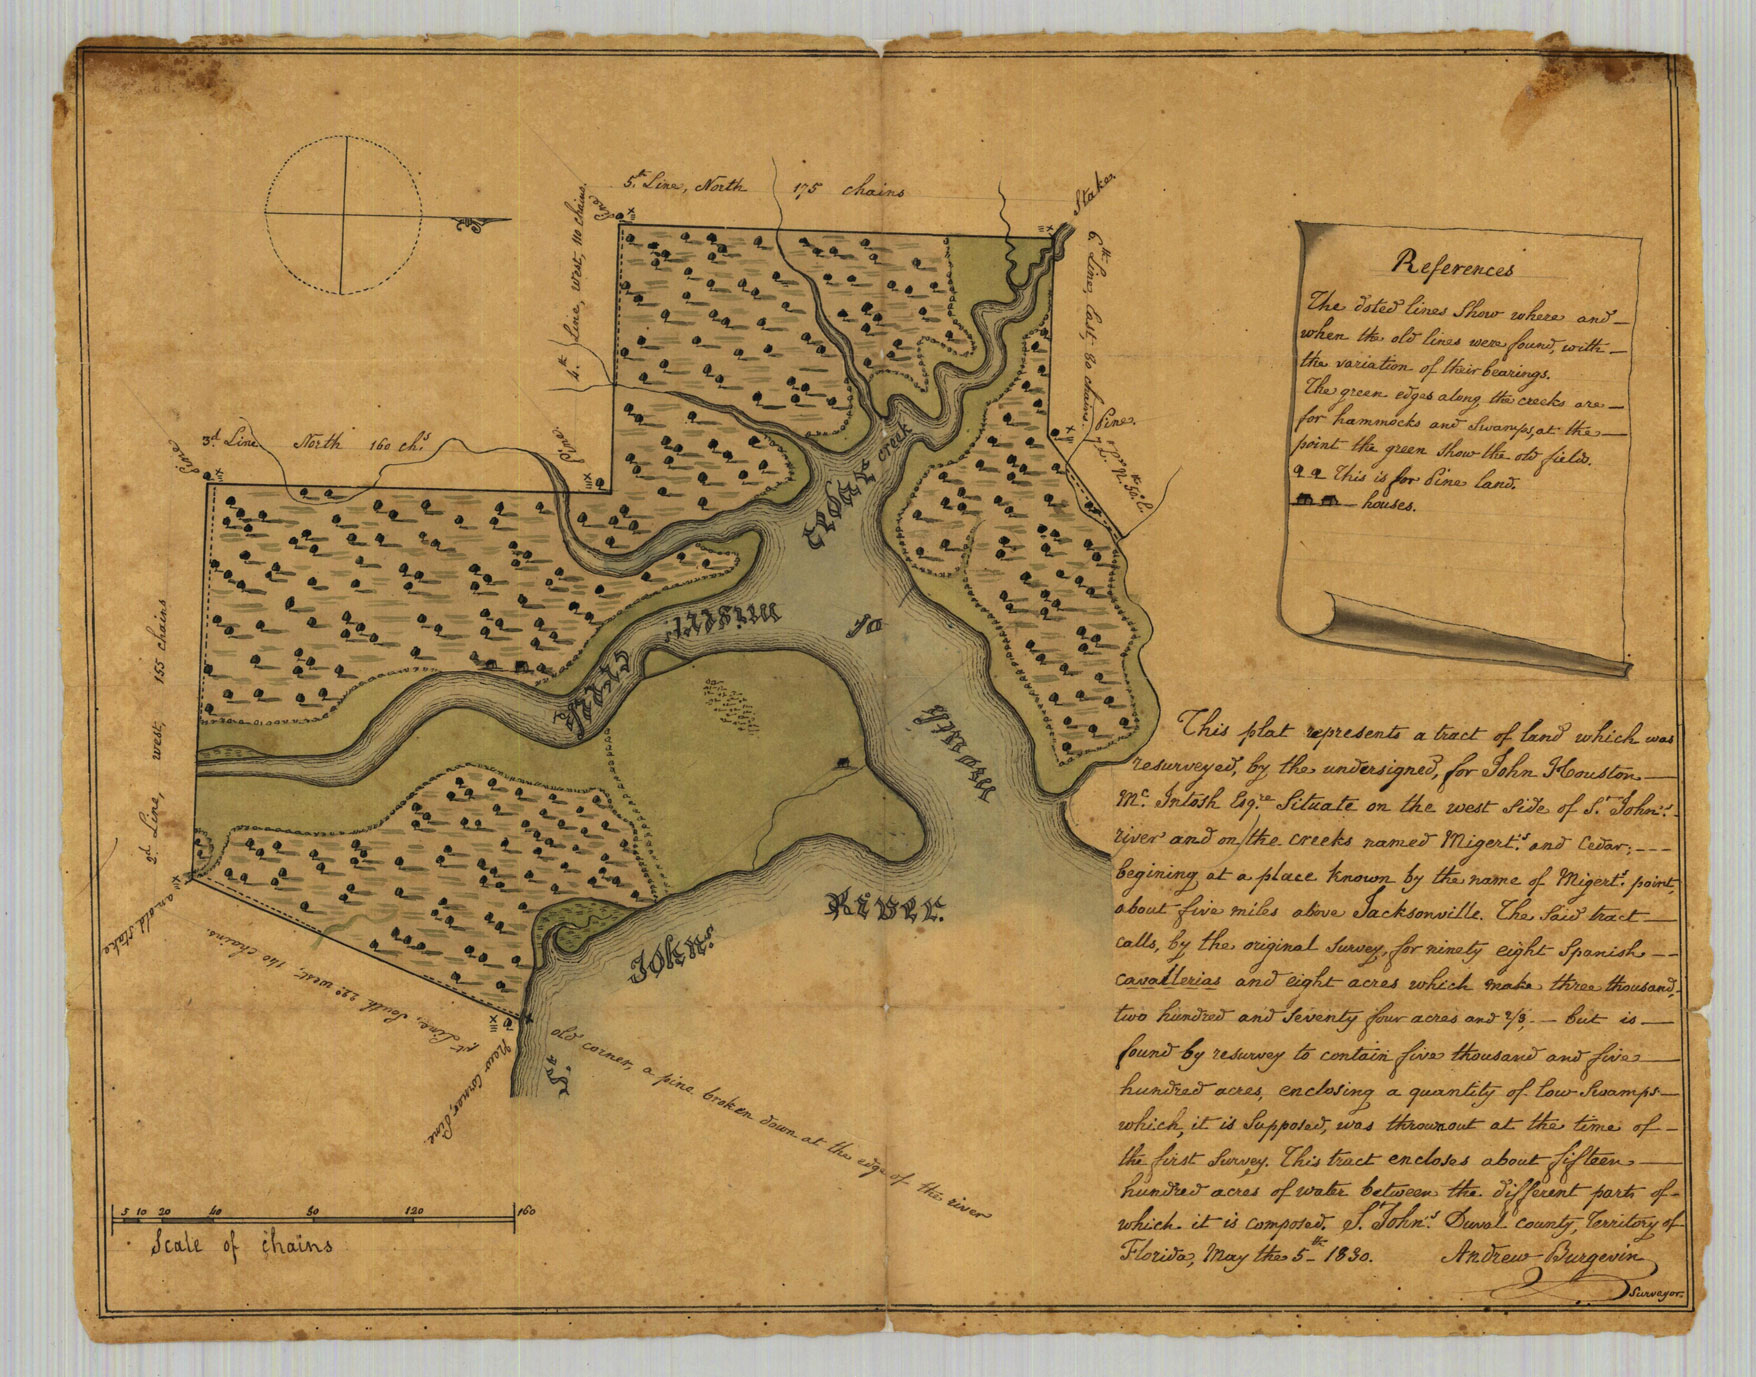 Survey play showing one of John Houston McIntosh's parcels of land along the St. Johns River and Cedar and McGirt's creeks (1830). Click to enlarge.